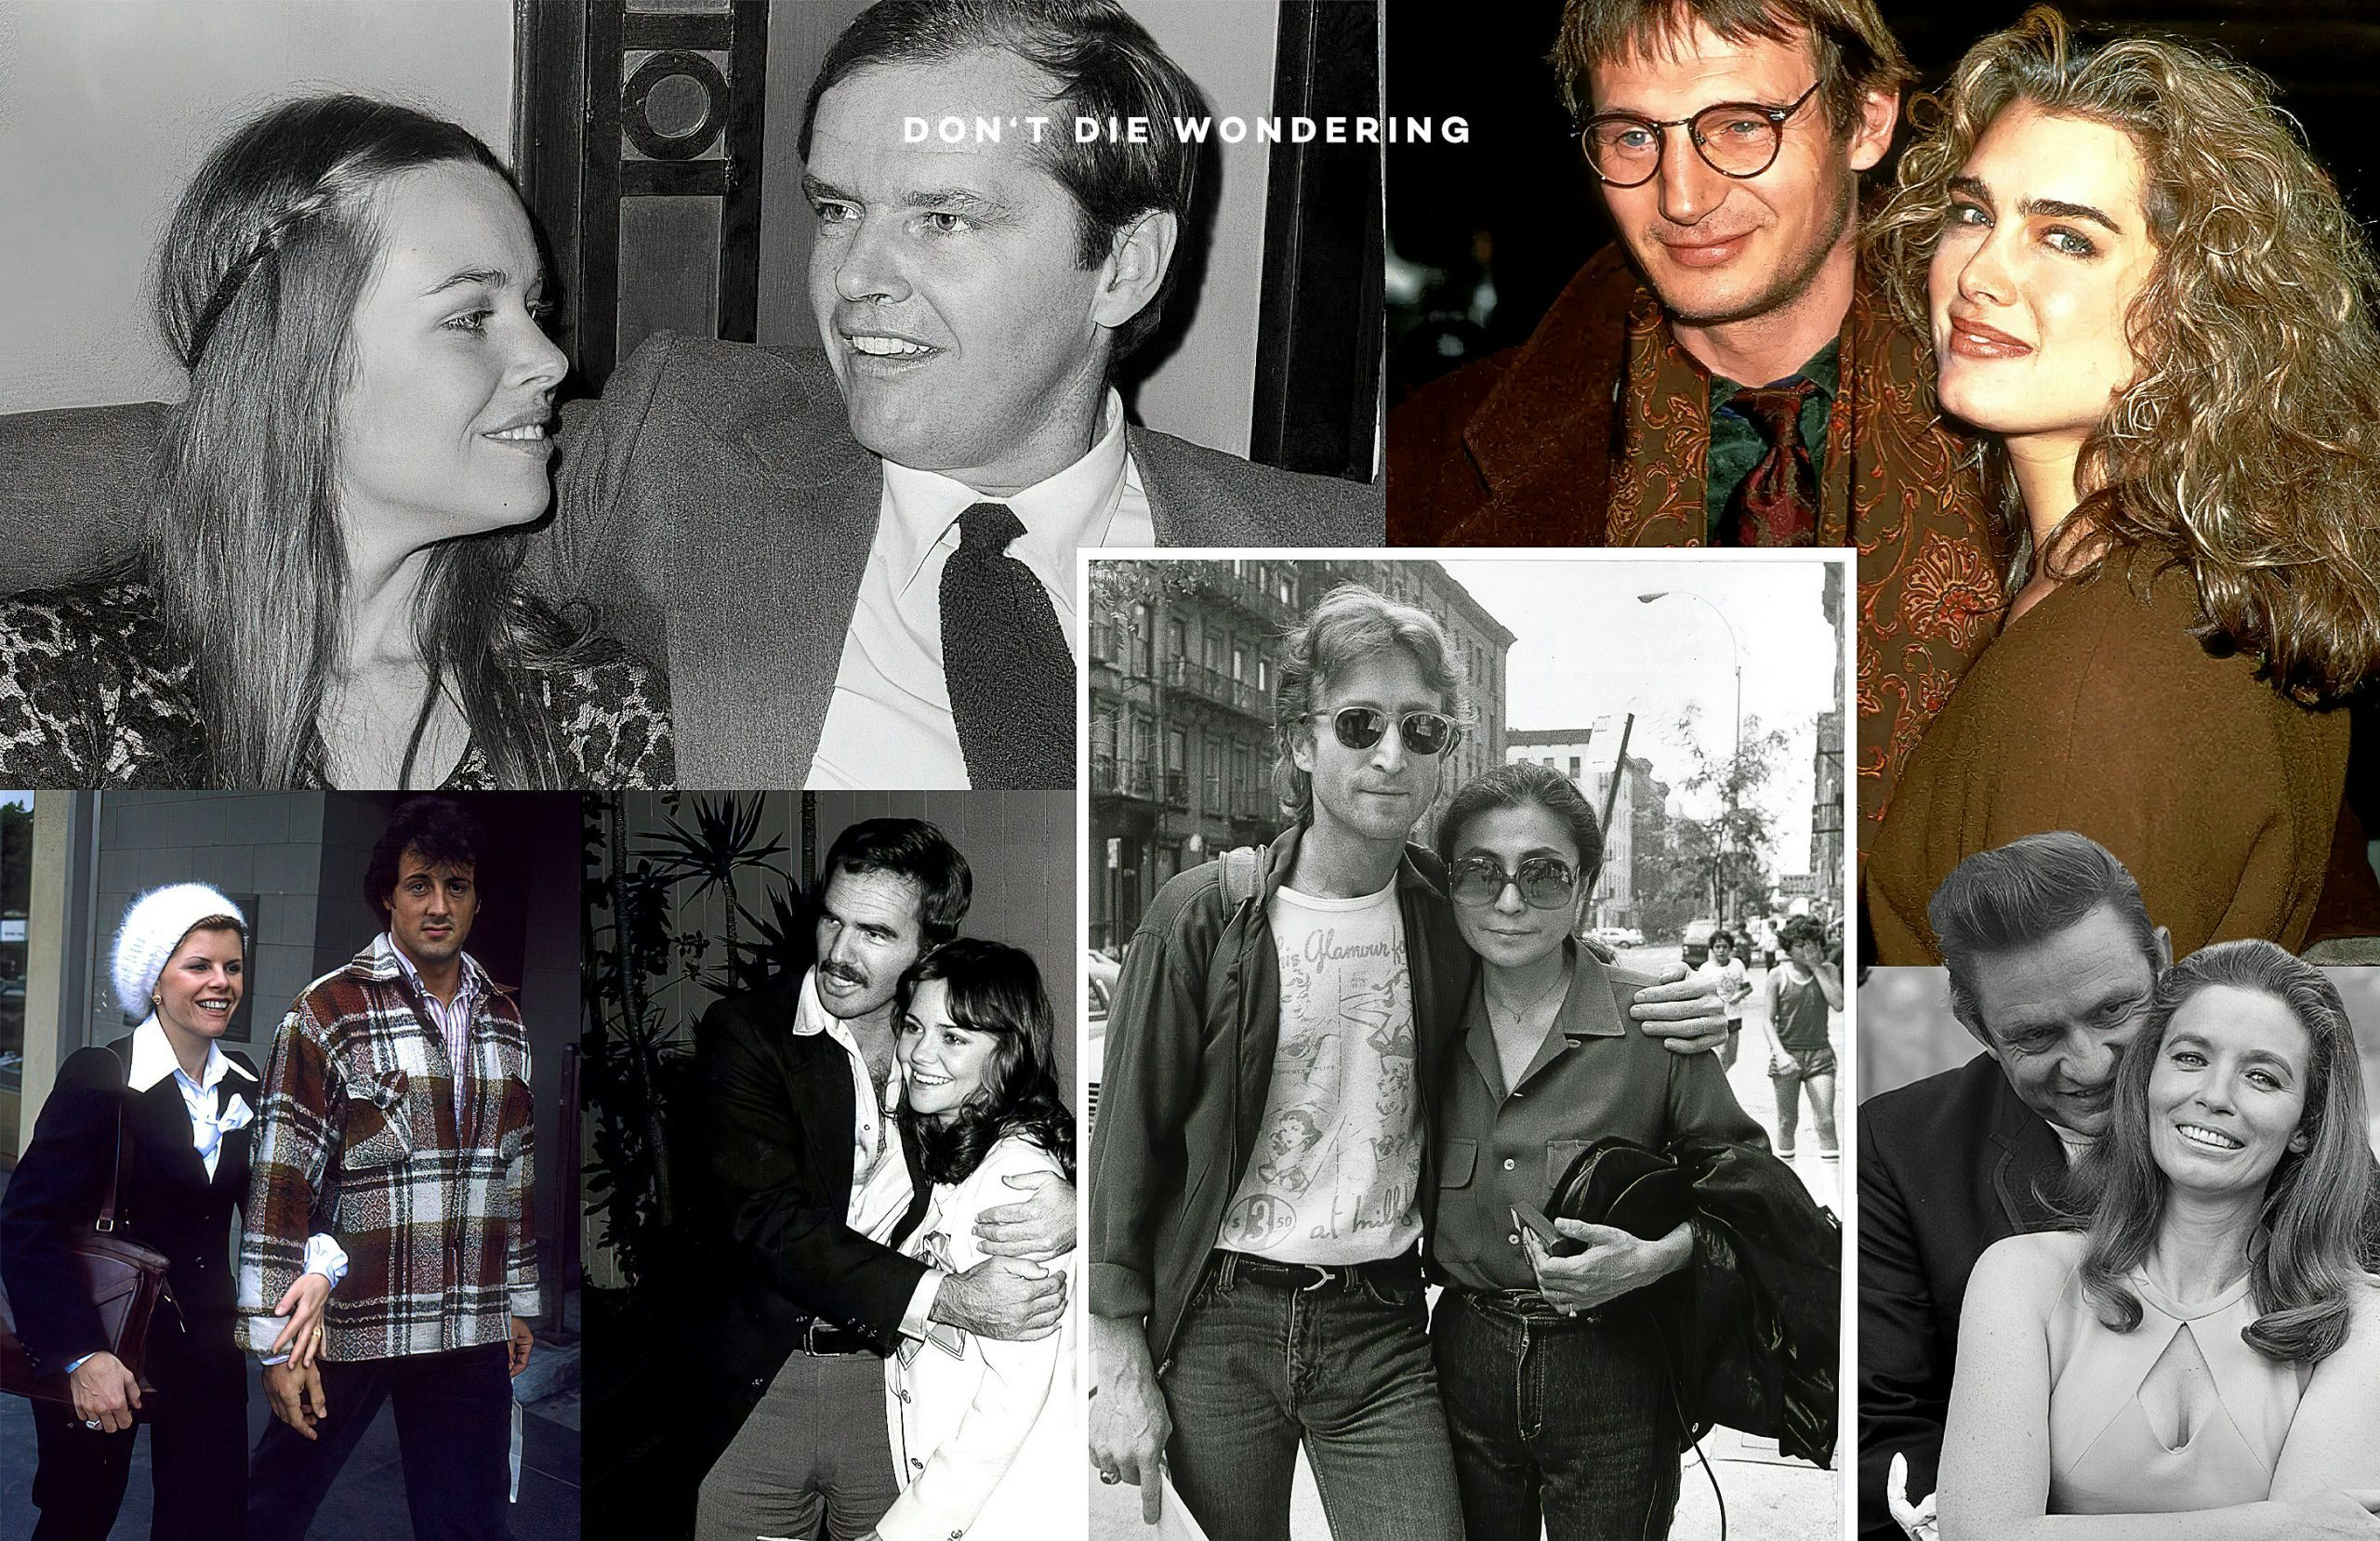 20 Of The ’70s Couples That You’ve Probably Forgotten About